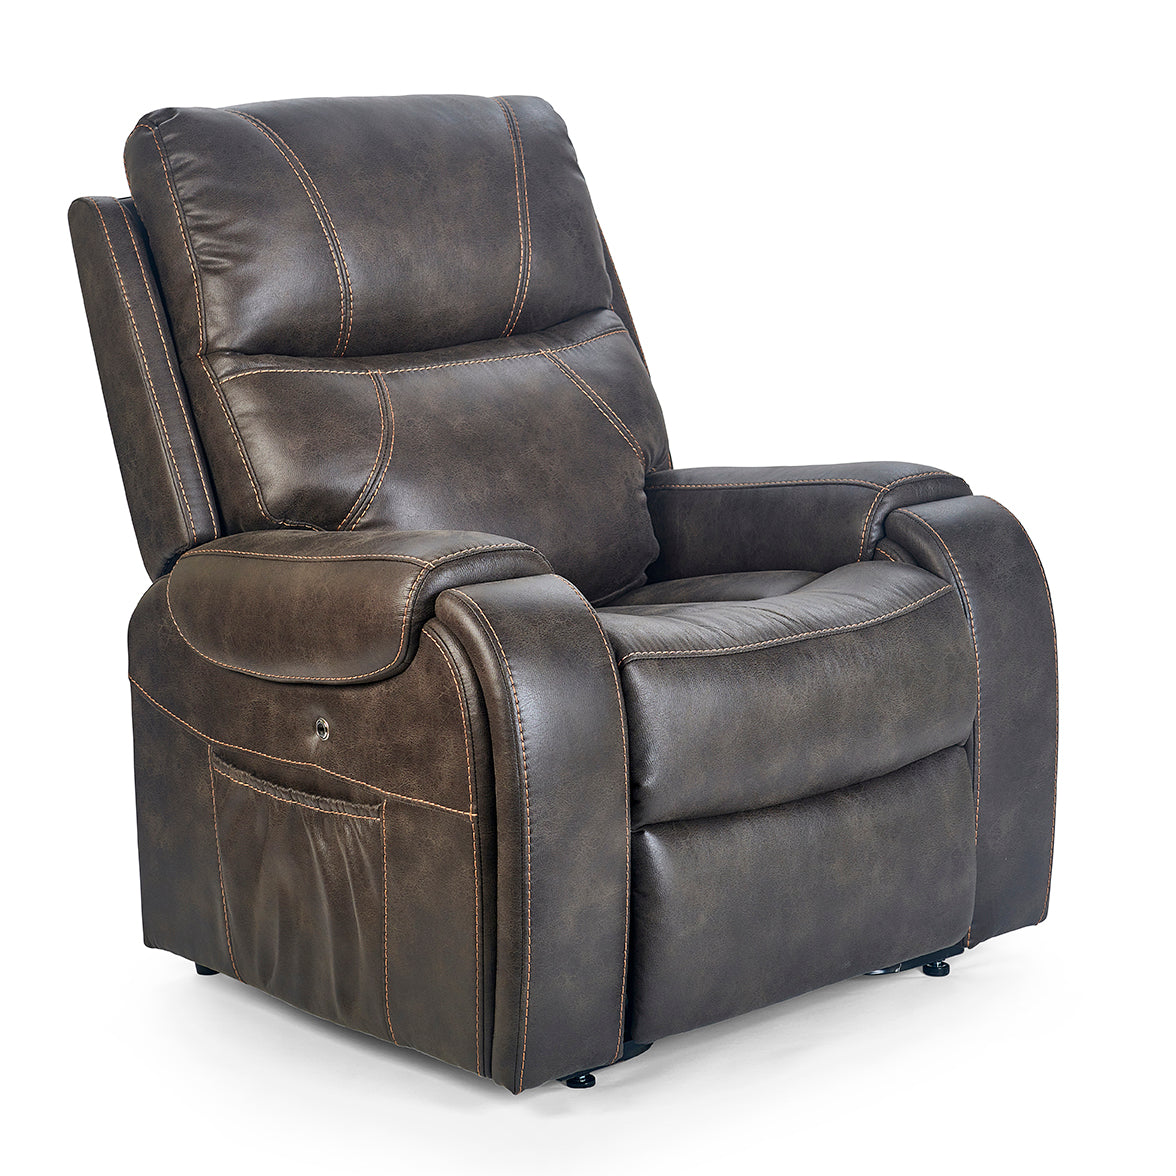 Golden Technologies Titan Luxury Reclining Power Lift Chair - Built in Table - Senior.com Assisted Lift Chairs